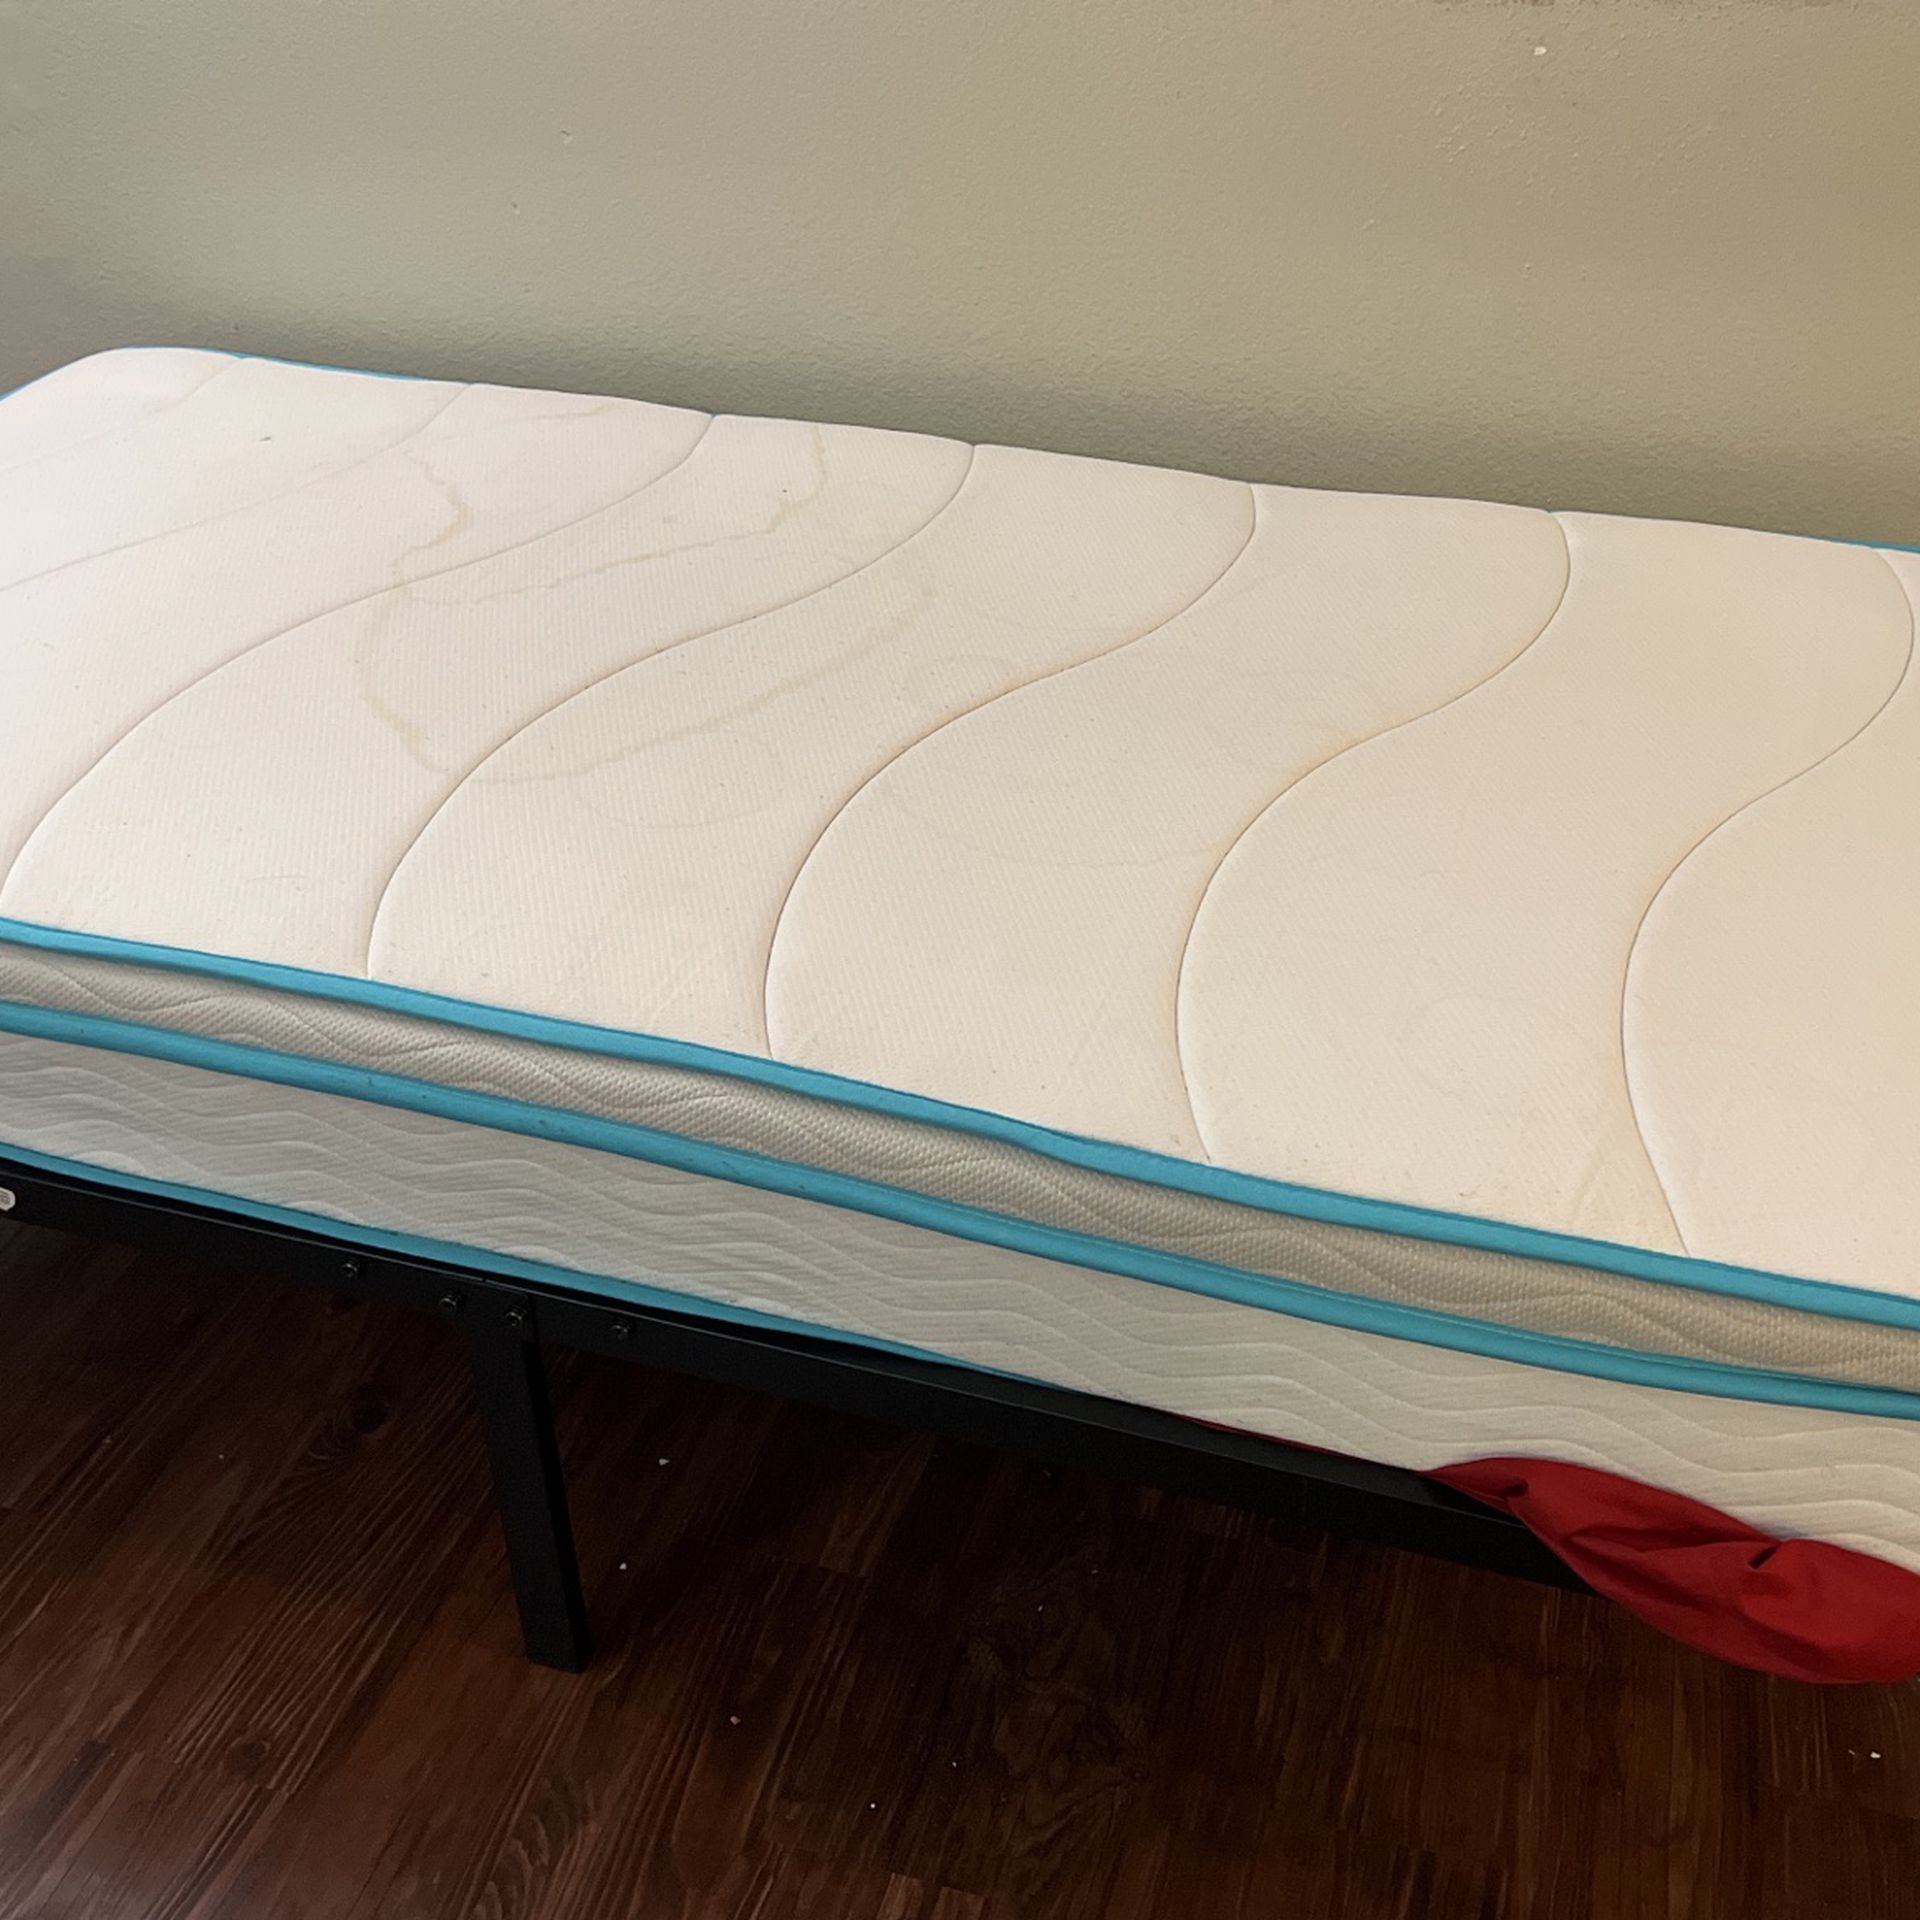 Move out Sale; Twin Bed With Stand For Sale